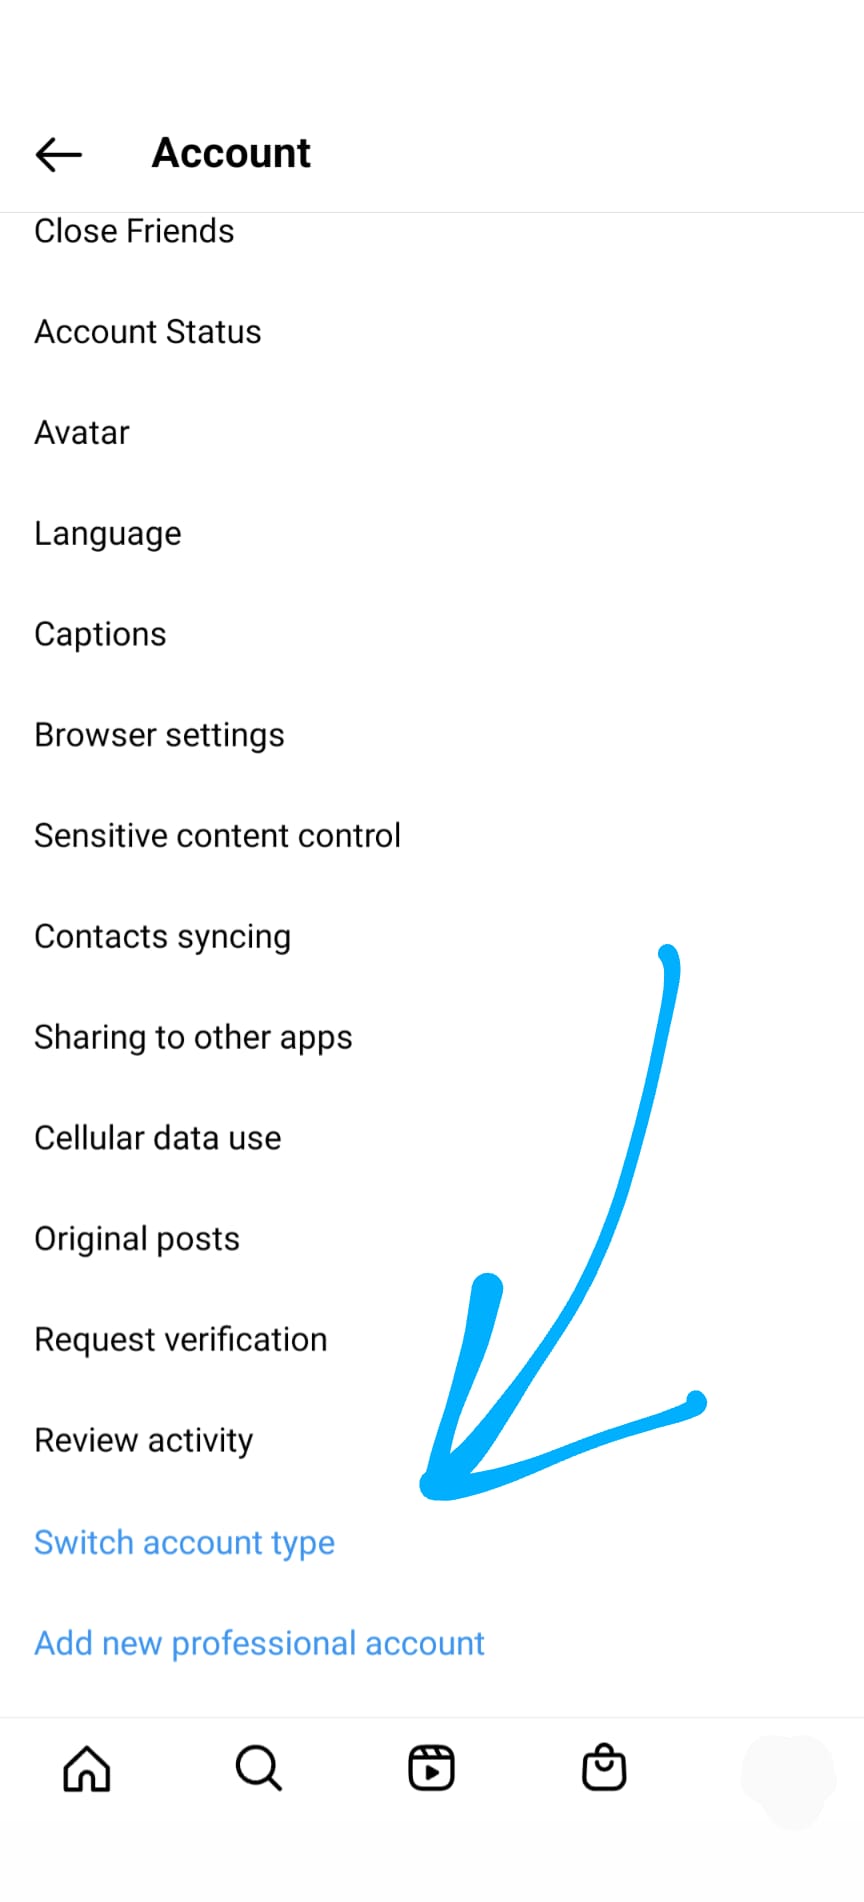 Switch-account-type on settings